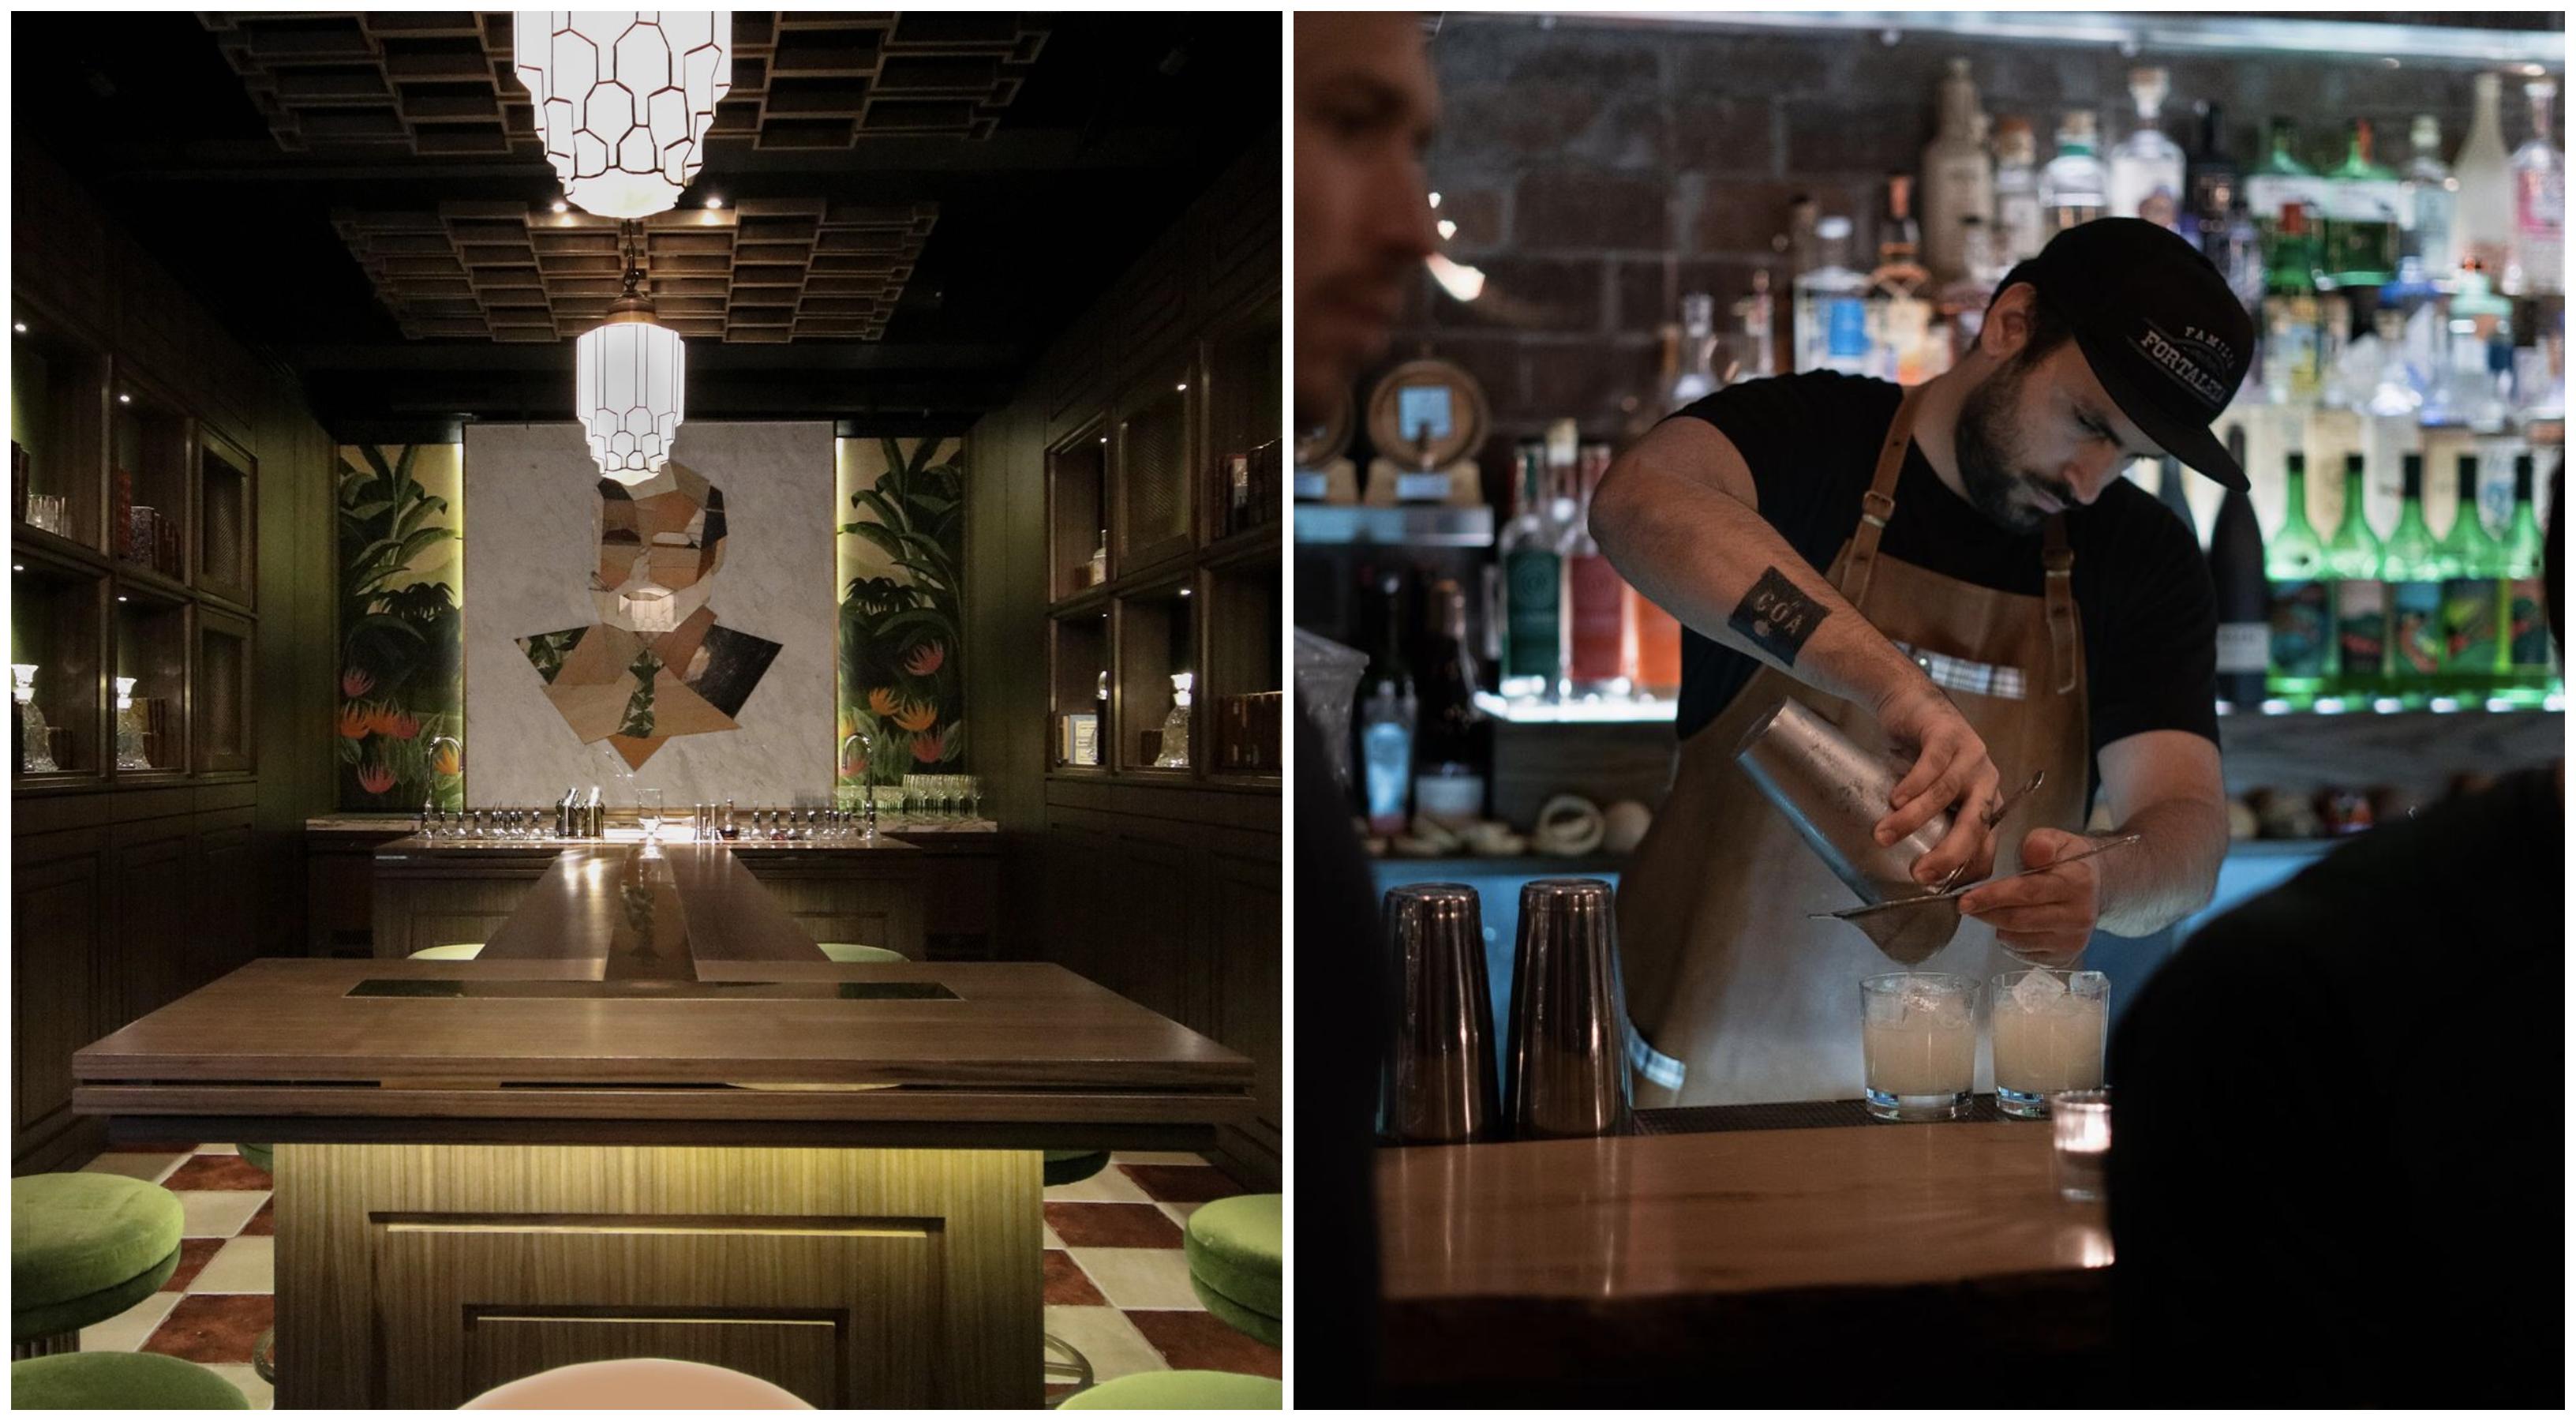 Hong Kong’s Old Man (left) and Coa (right), both of which made it onto this year’s World’s 50 Best Bars list. Photos via Facebook.